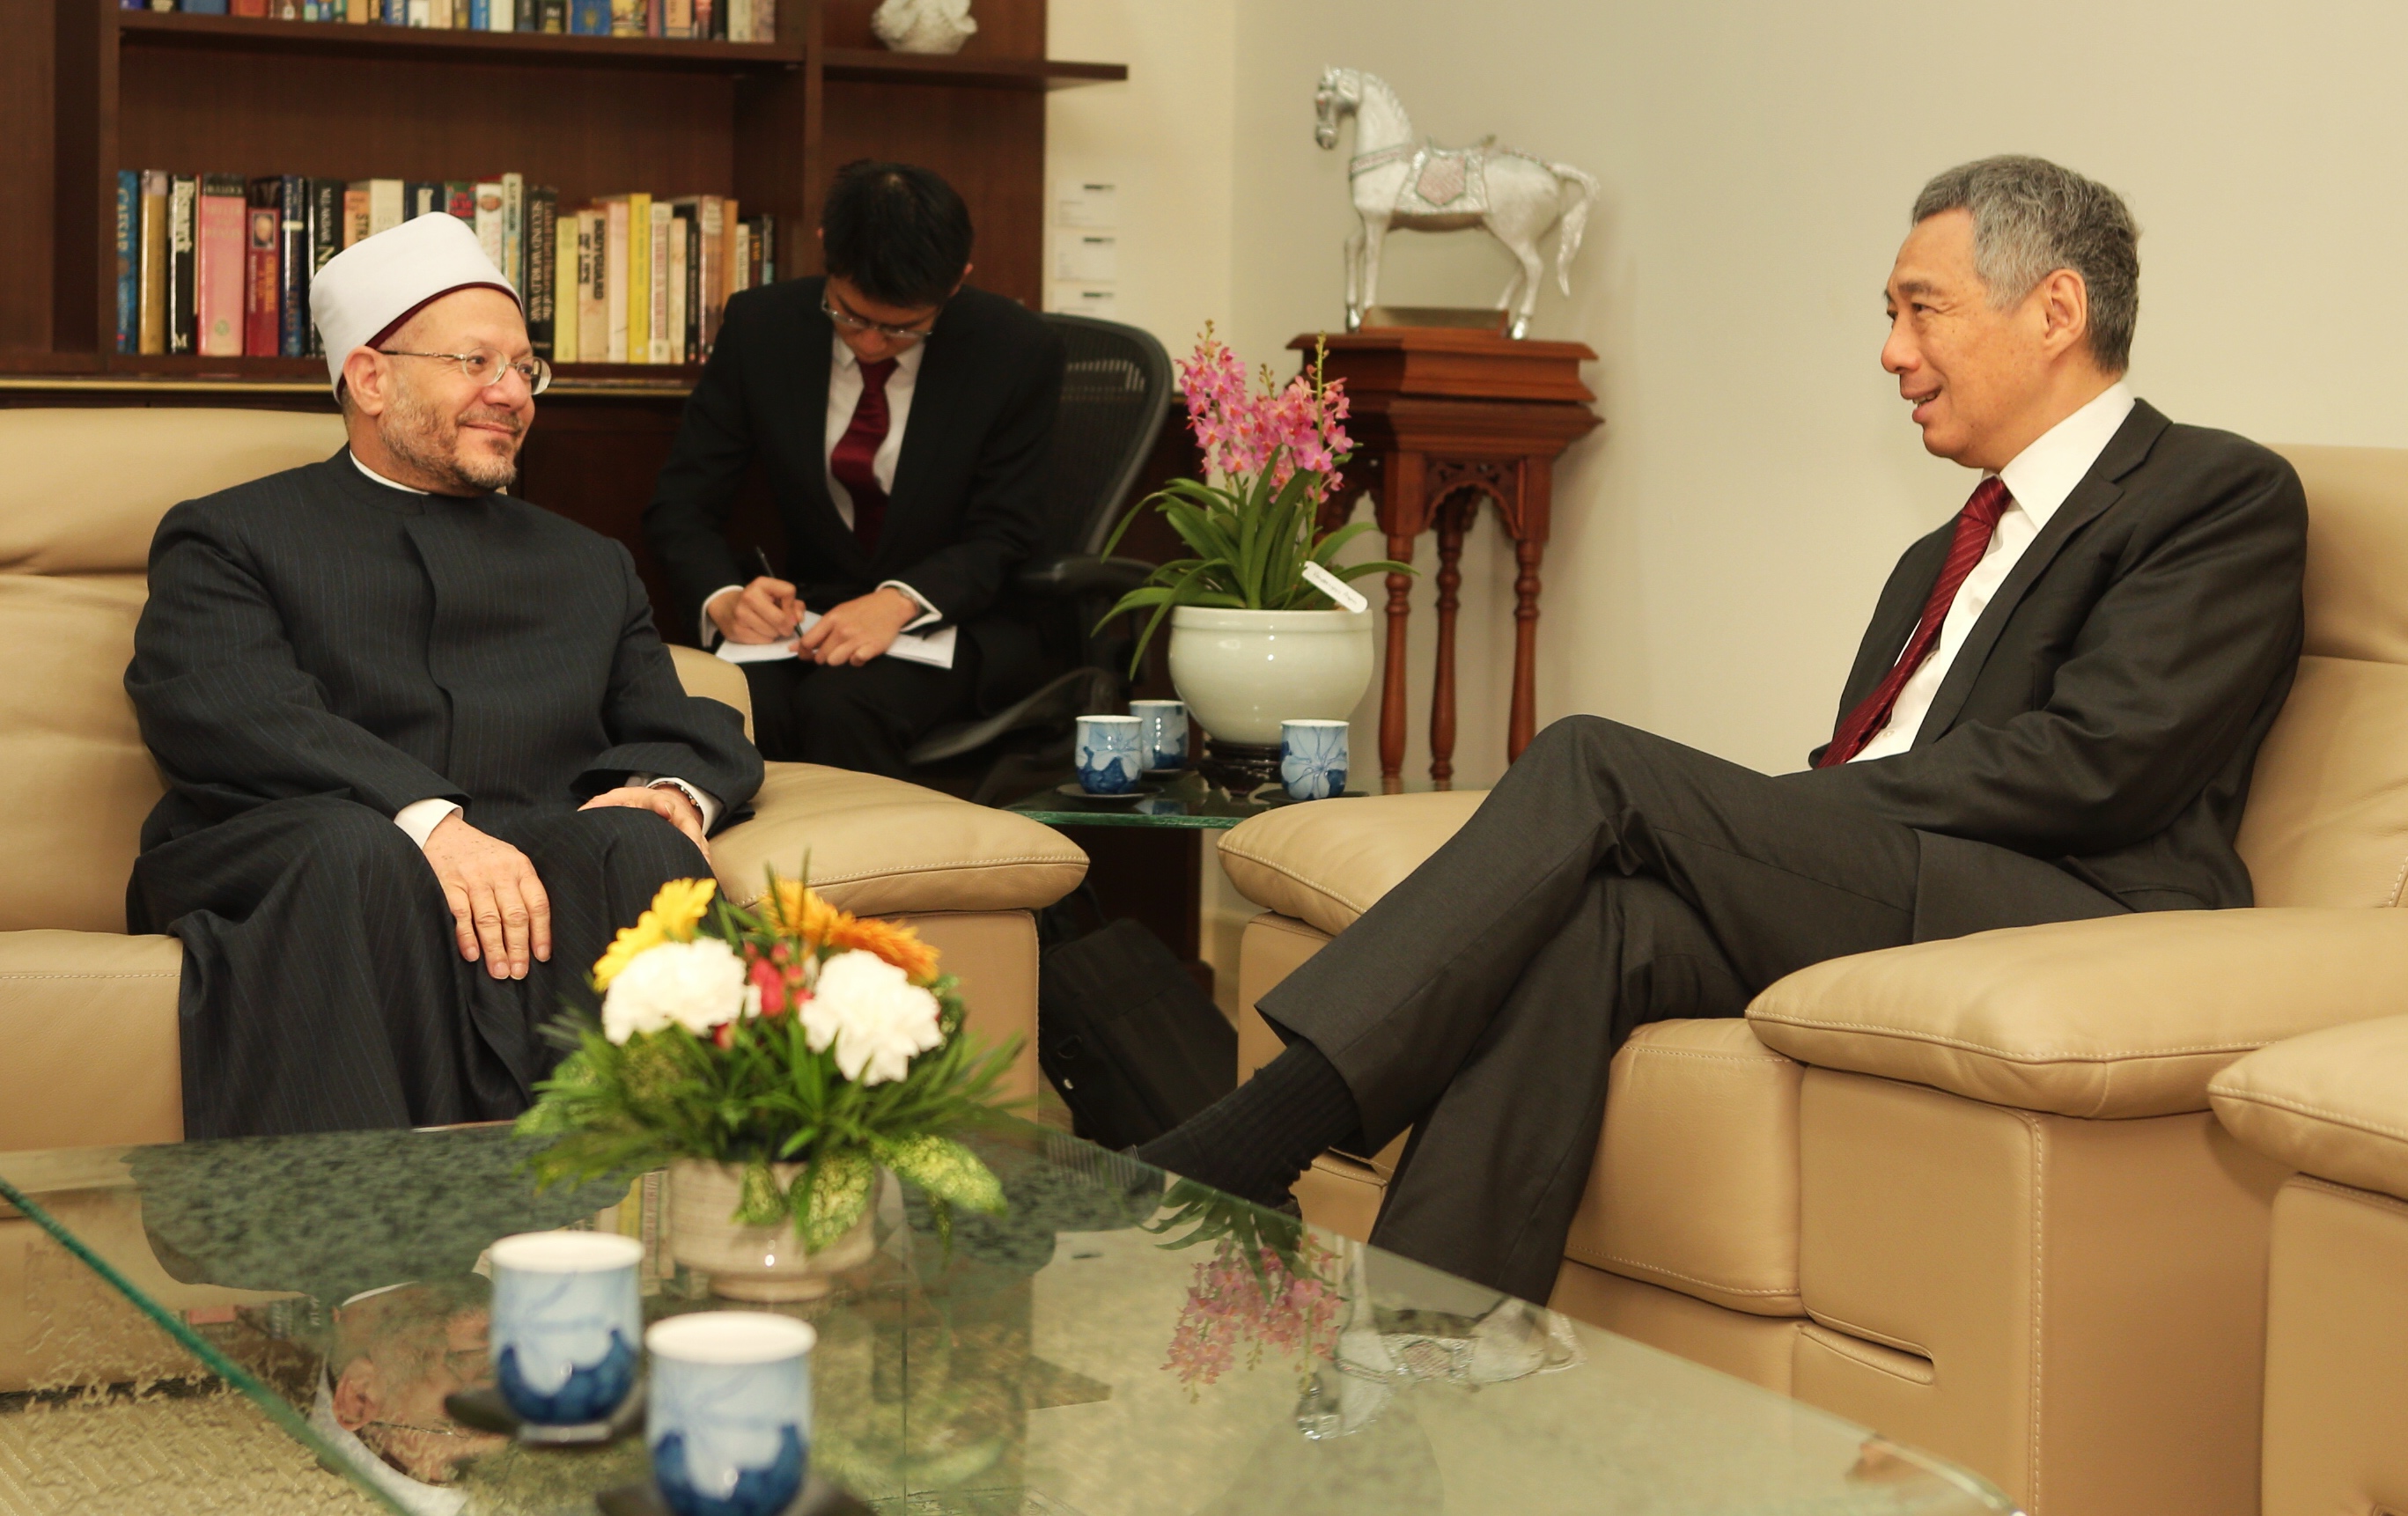 Grand Mufti of Egypt Sheikh Dr Shawki Allam called on Prime Minister Lee Hsien Loong at the Istana on 26 Jan 2015 (MCI Photo by Terence Tan)